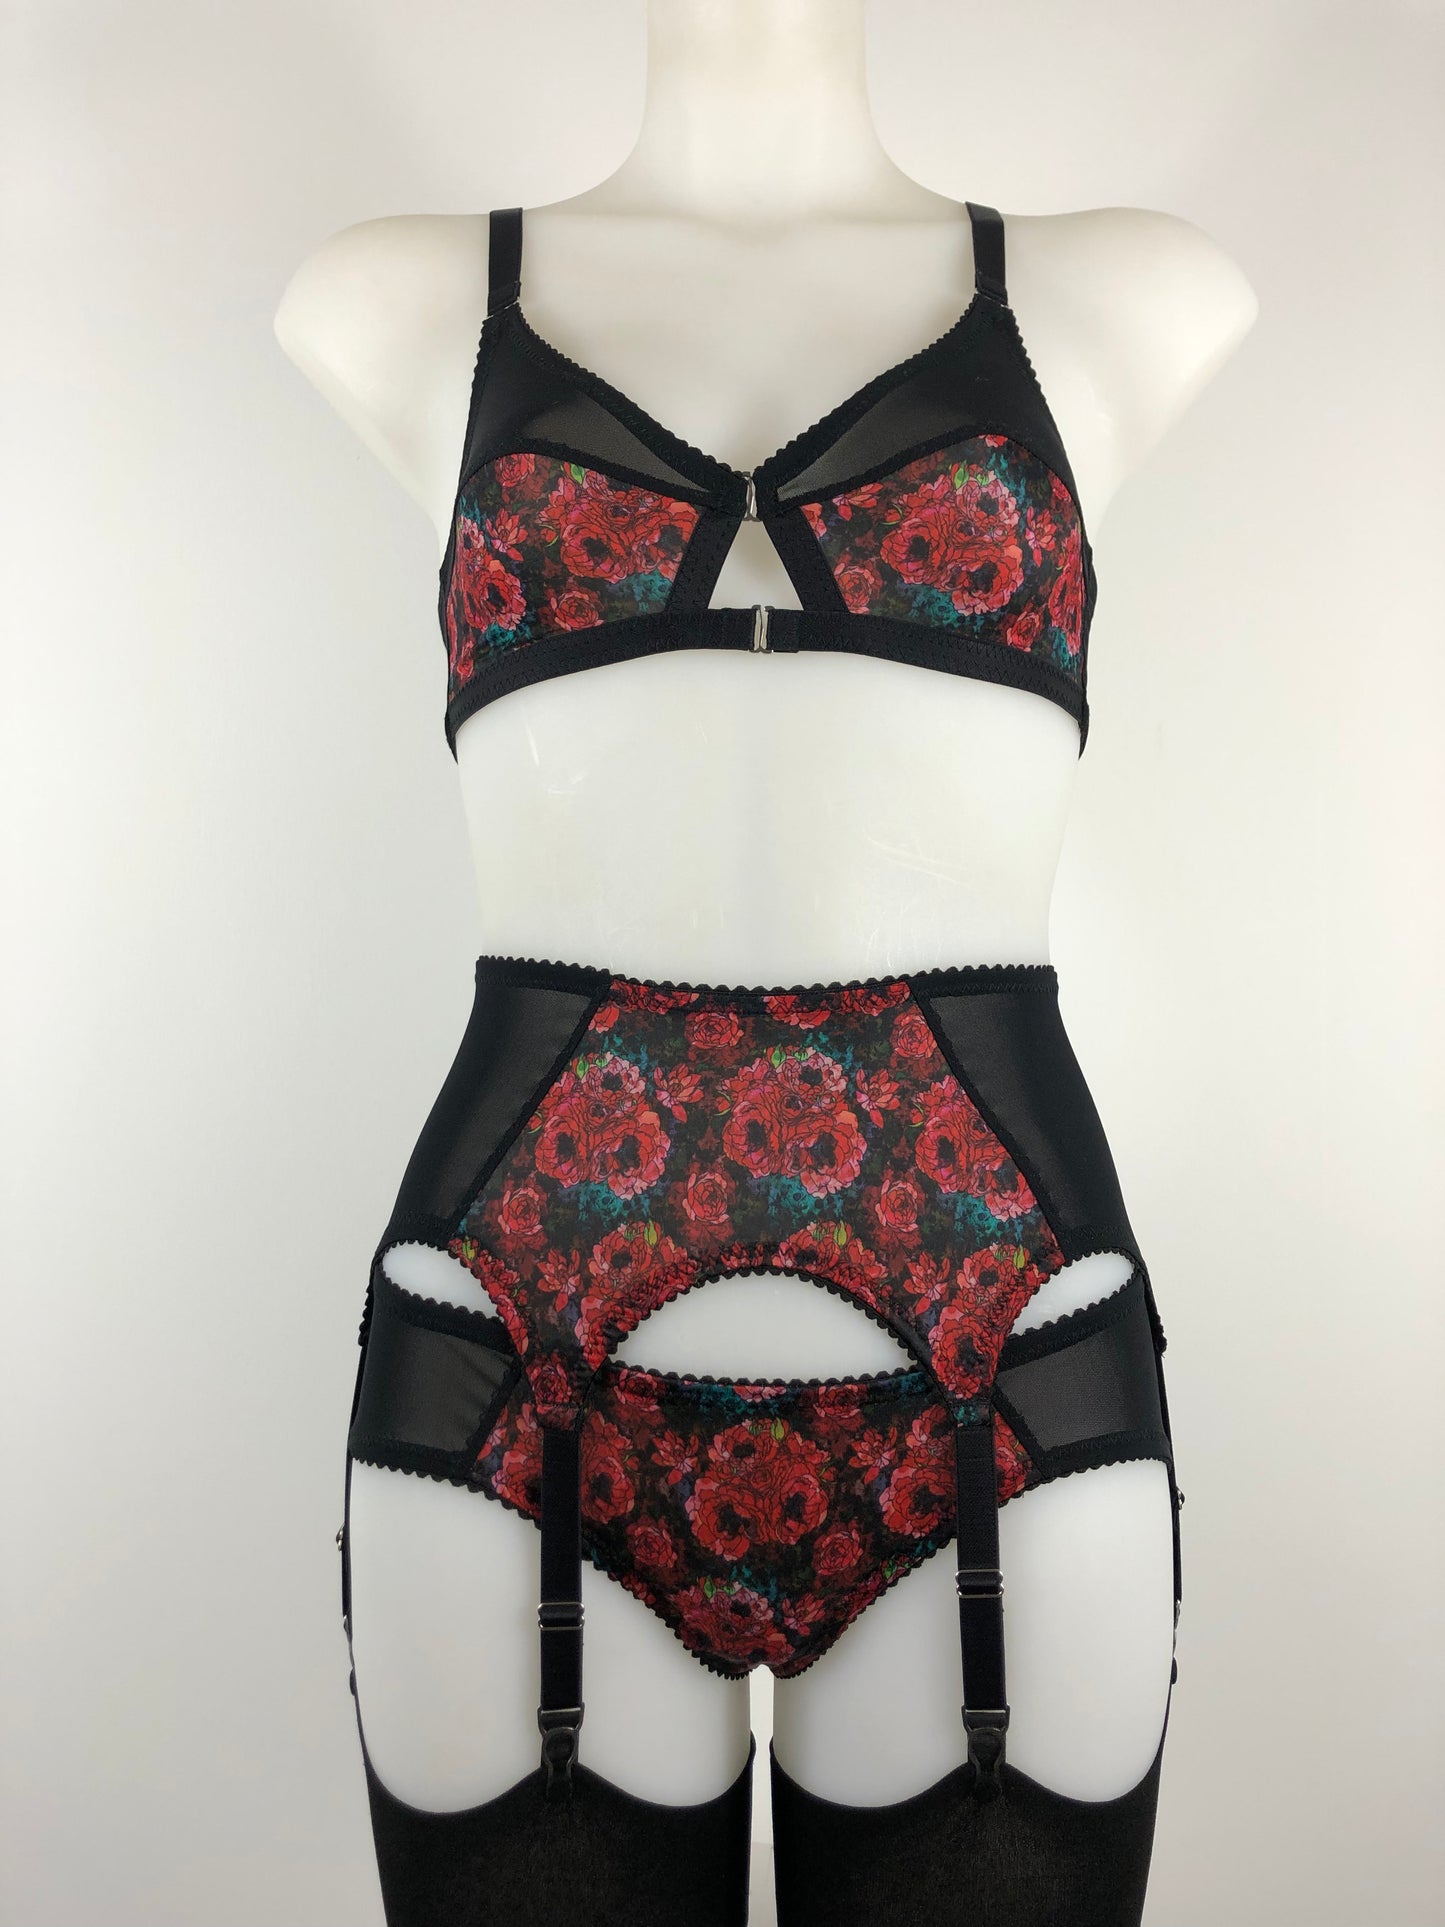 love witch inspired lingerie set. Classic cut pantie knicker inspired by the anna biller film. Used a rich red floral brocade style pattern with black mesh and trims. Ideal gothic, spiritual, witchy underwear